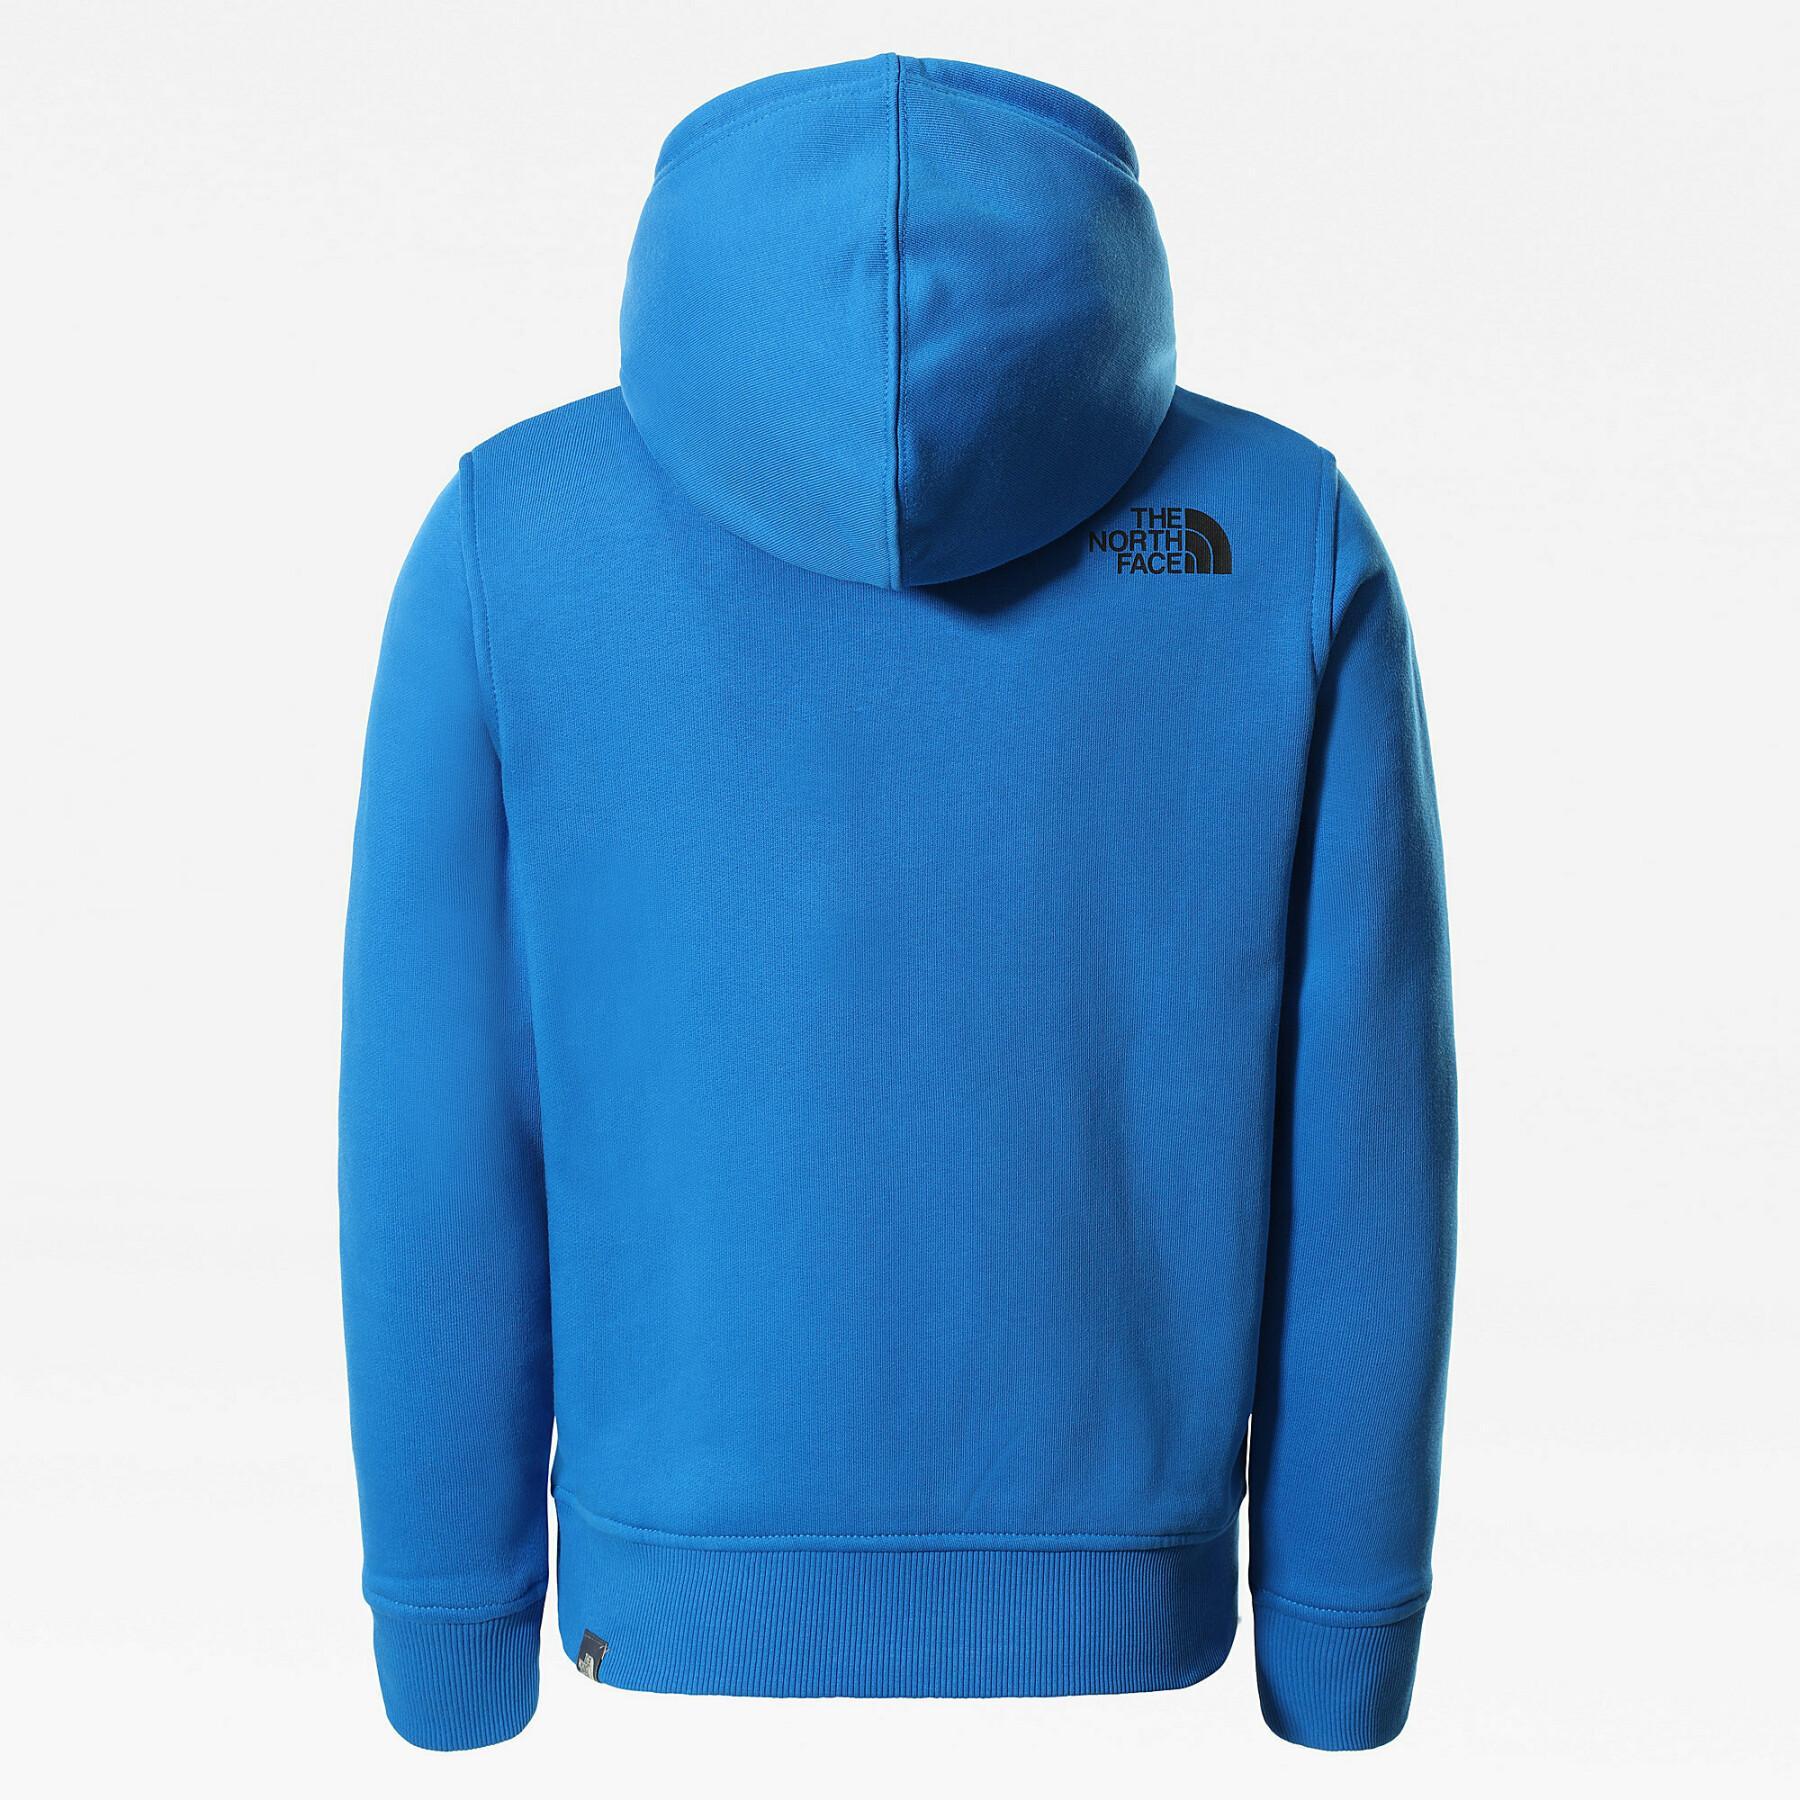 Child hoodie The North Face New Box